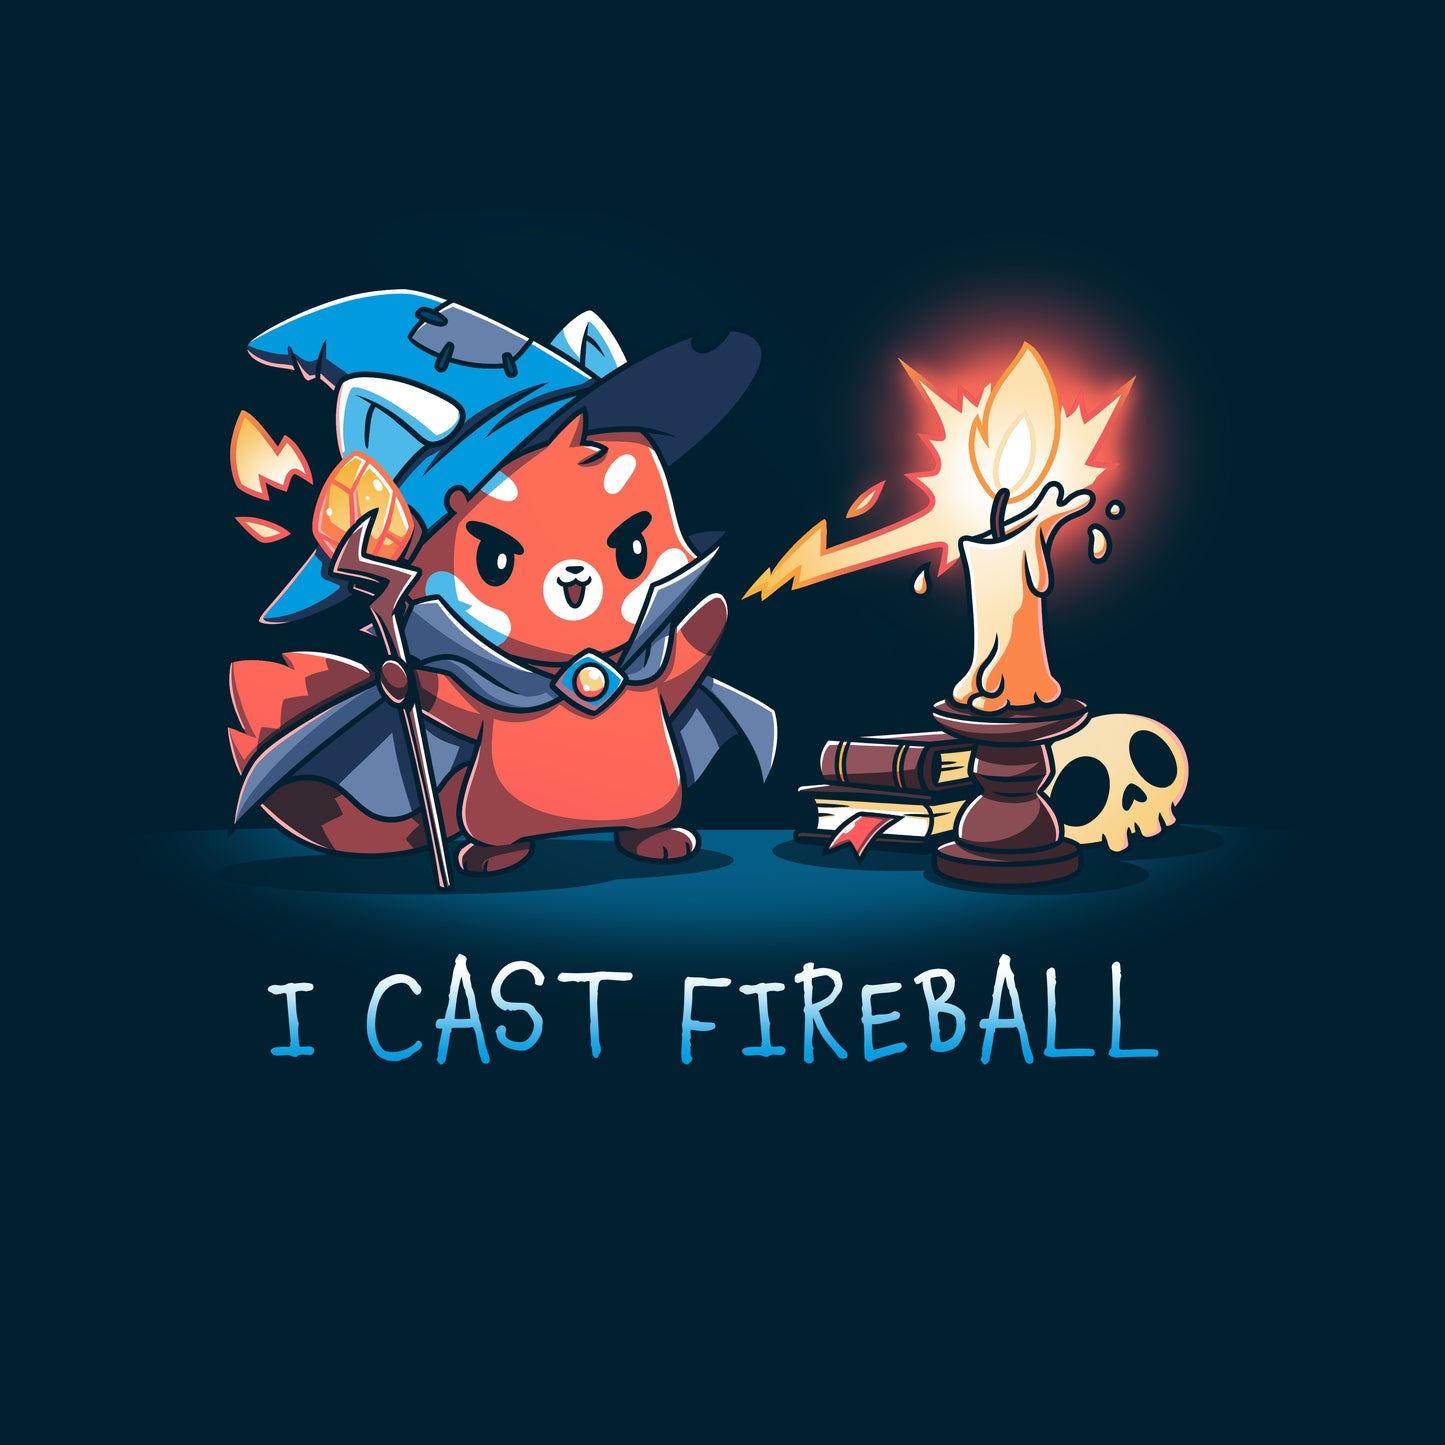 A cute fox in a wizard outfit casts a fireball spell towards a candle, with the text "I CAST FIREBALL" below. A stack of books and a skull are in the background on this super soft ringspun cotton navy blue monsterdigital I Cast Fireball T-shirt.